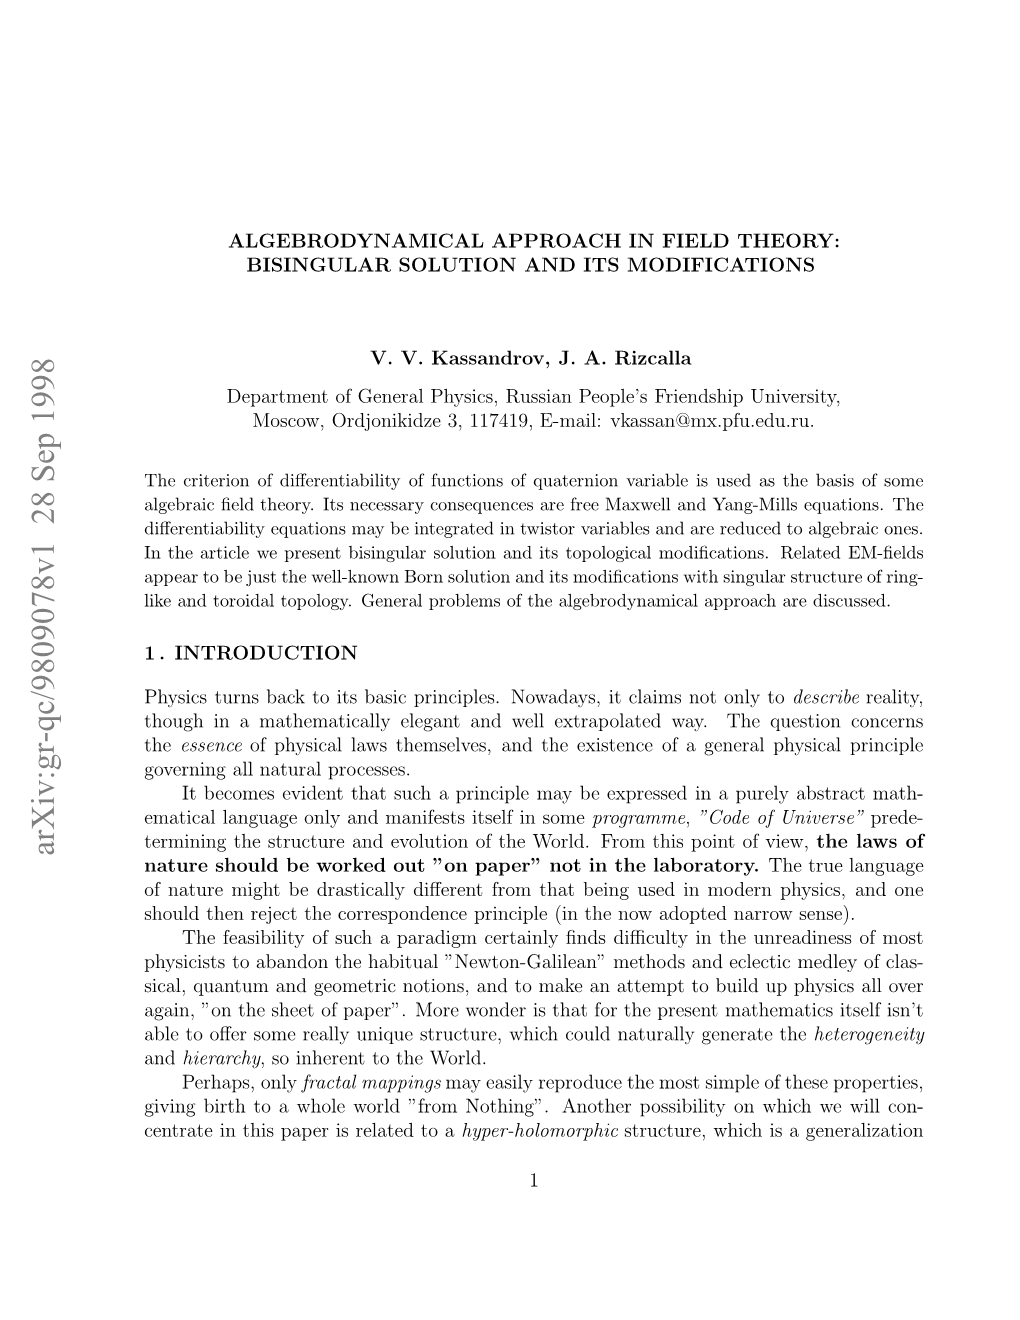 Algebrodynamical Approach in Field Theory: Bisingular Solution and Its